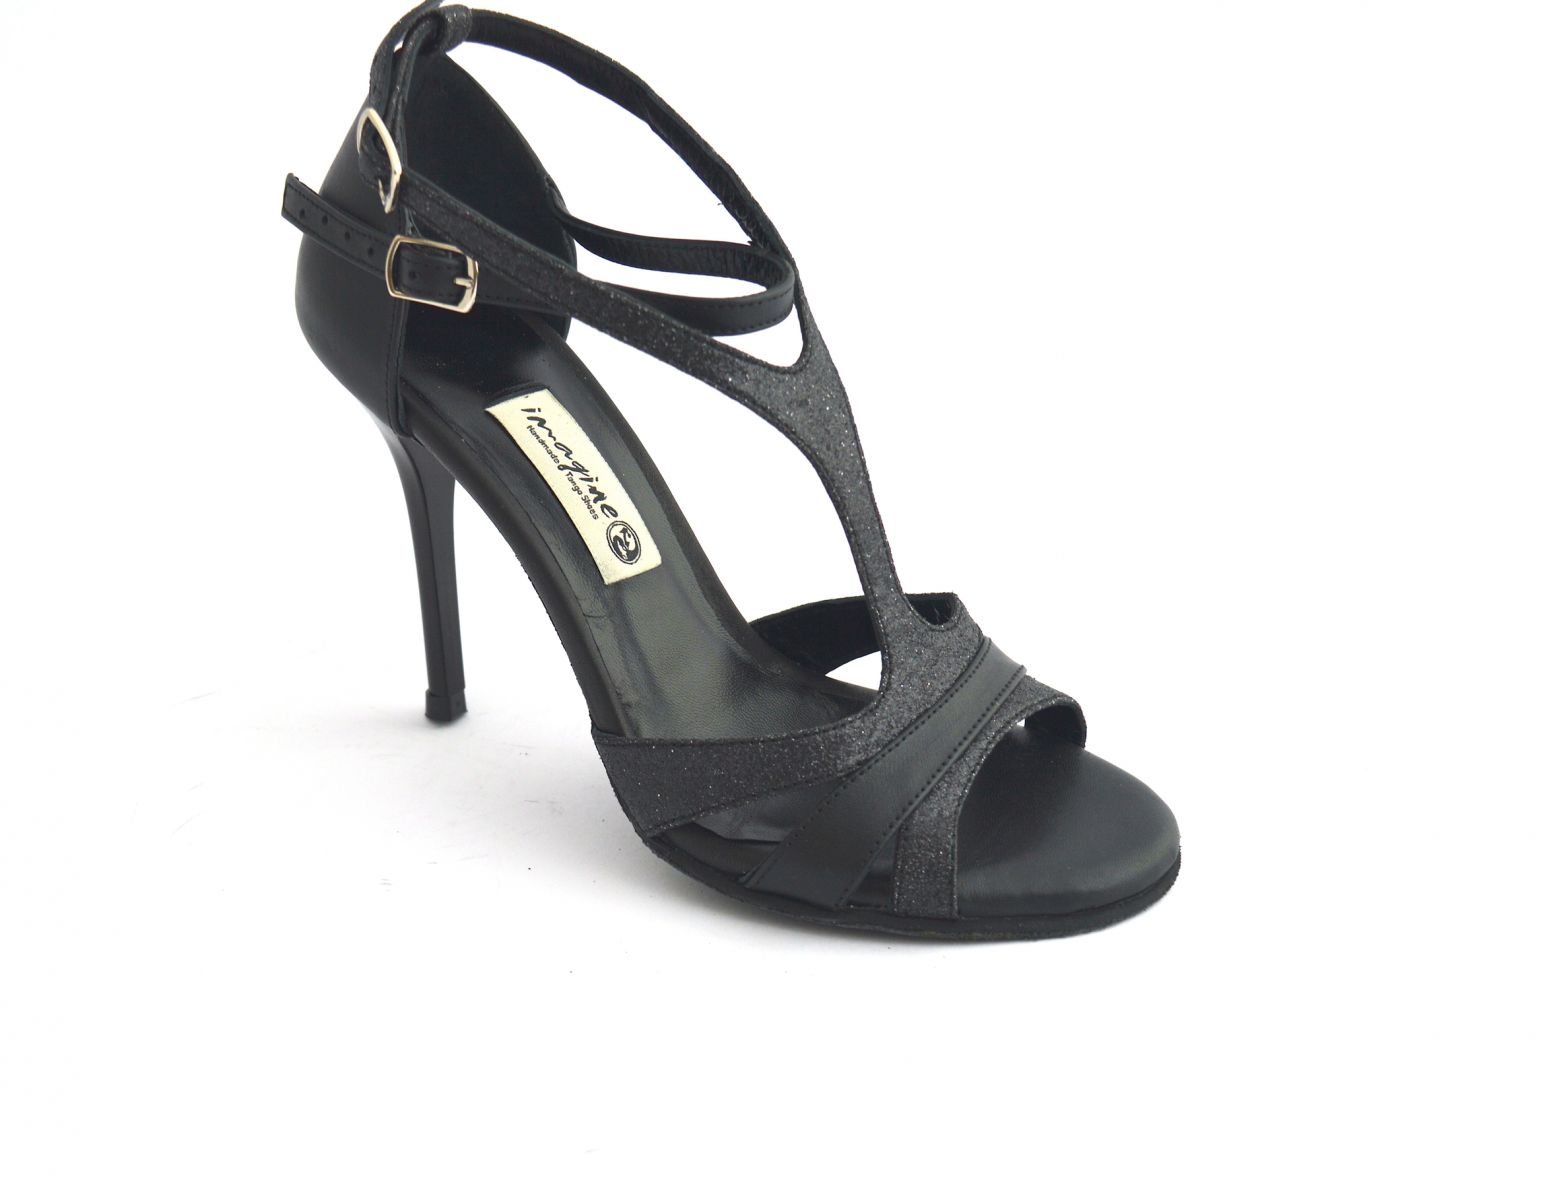 Women argentine tango shoe, in black leather and black glitter 